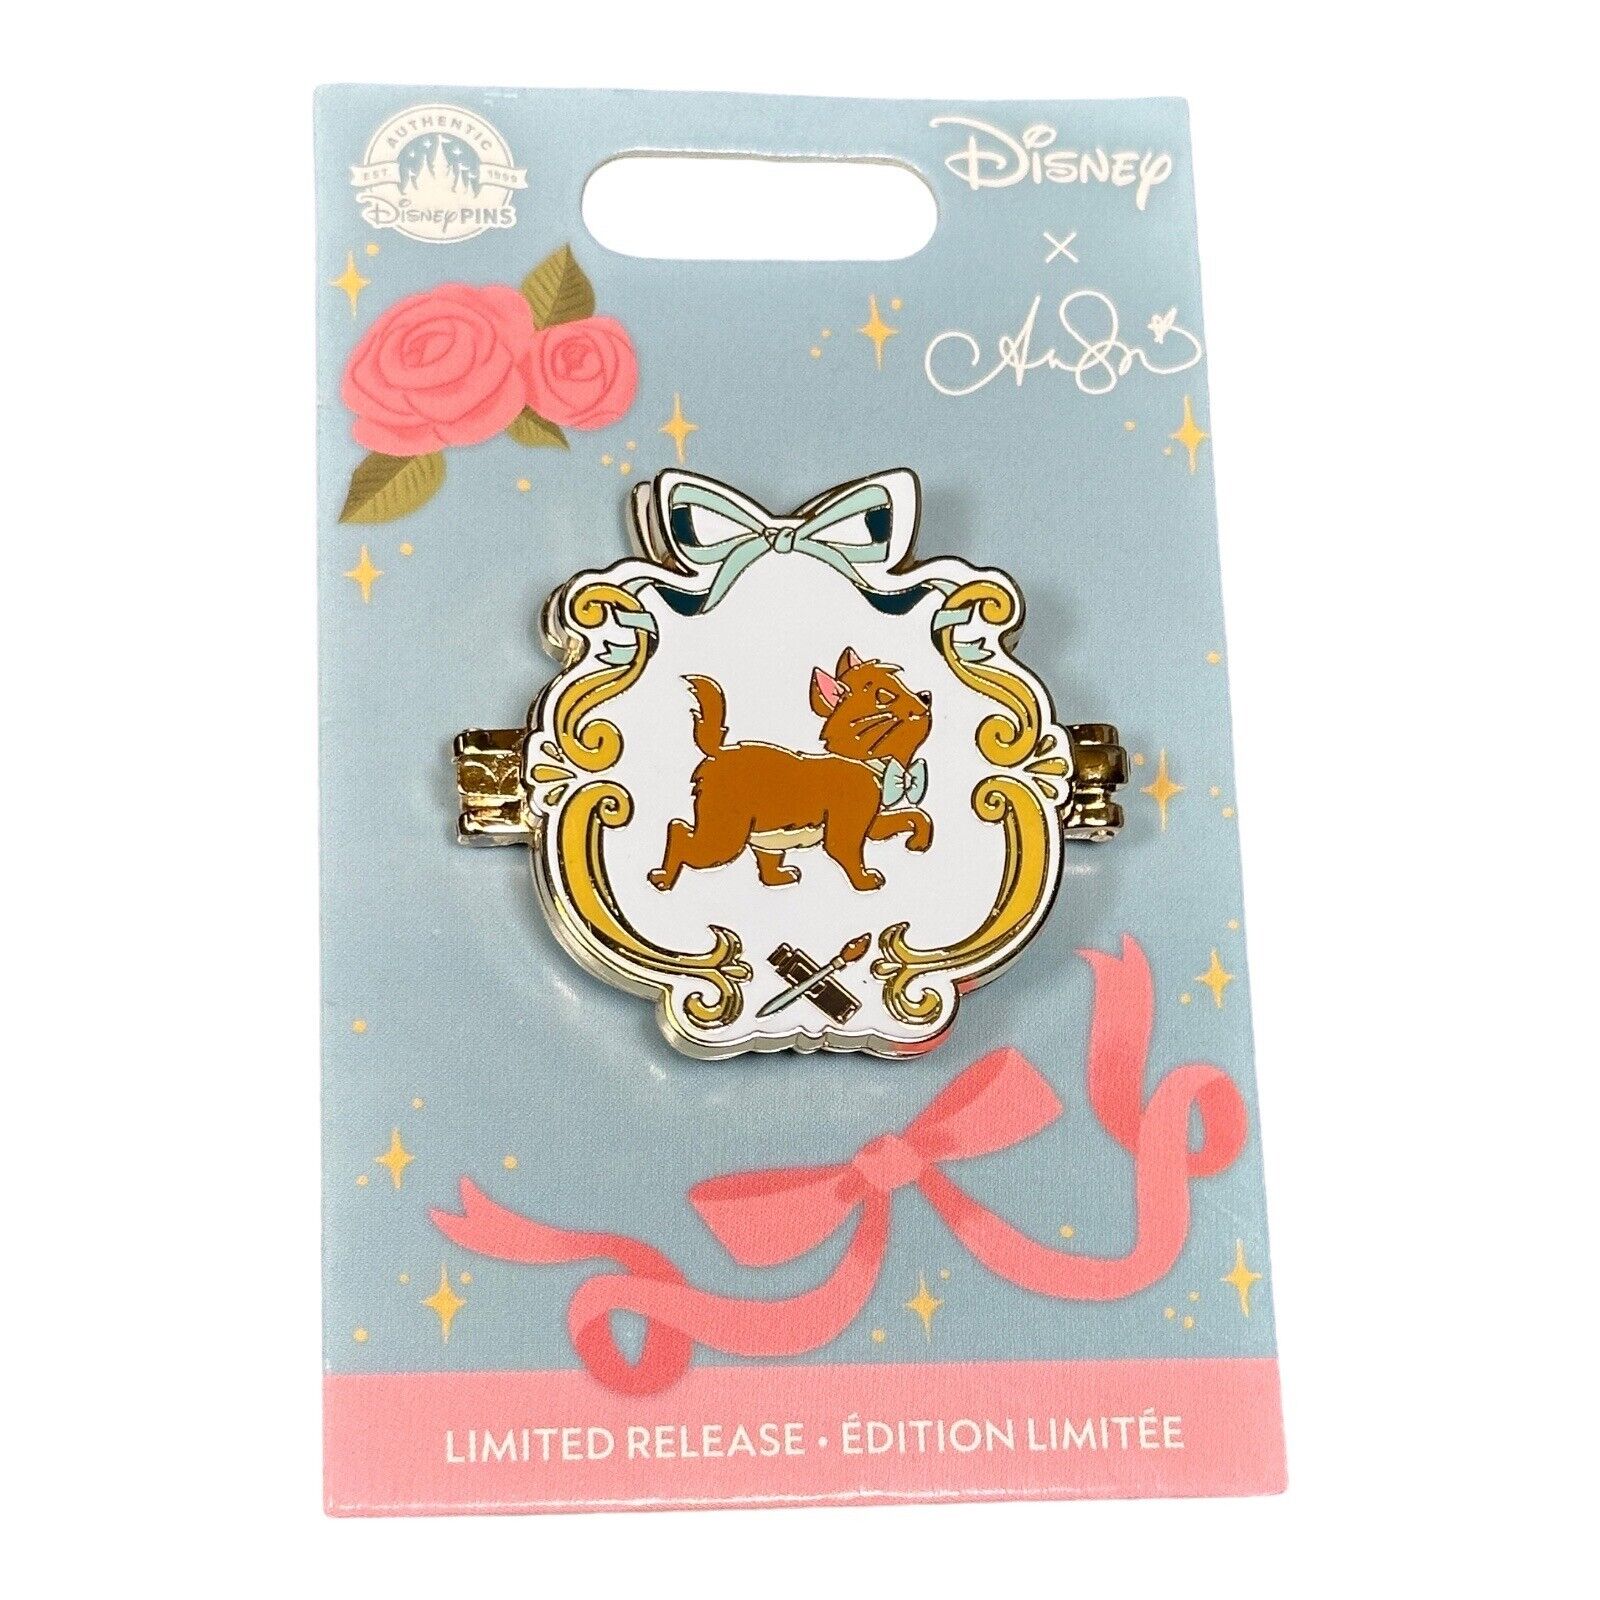 2022 Disney Parks Aristocats Hinged Pin by Ann Shen